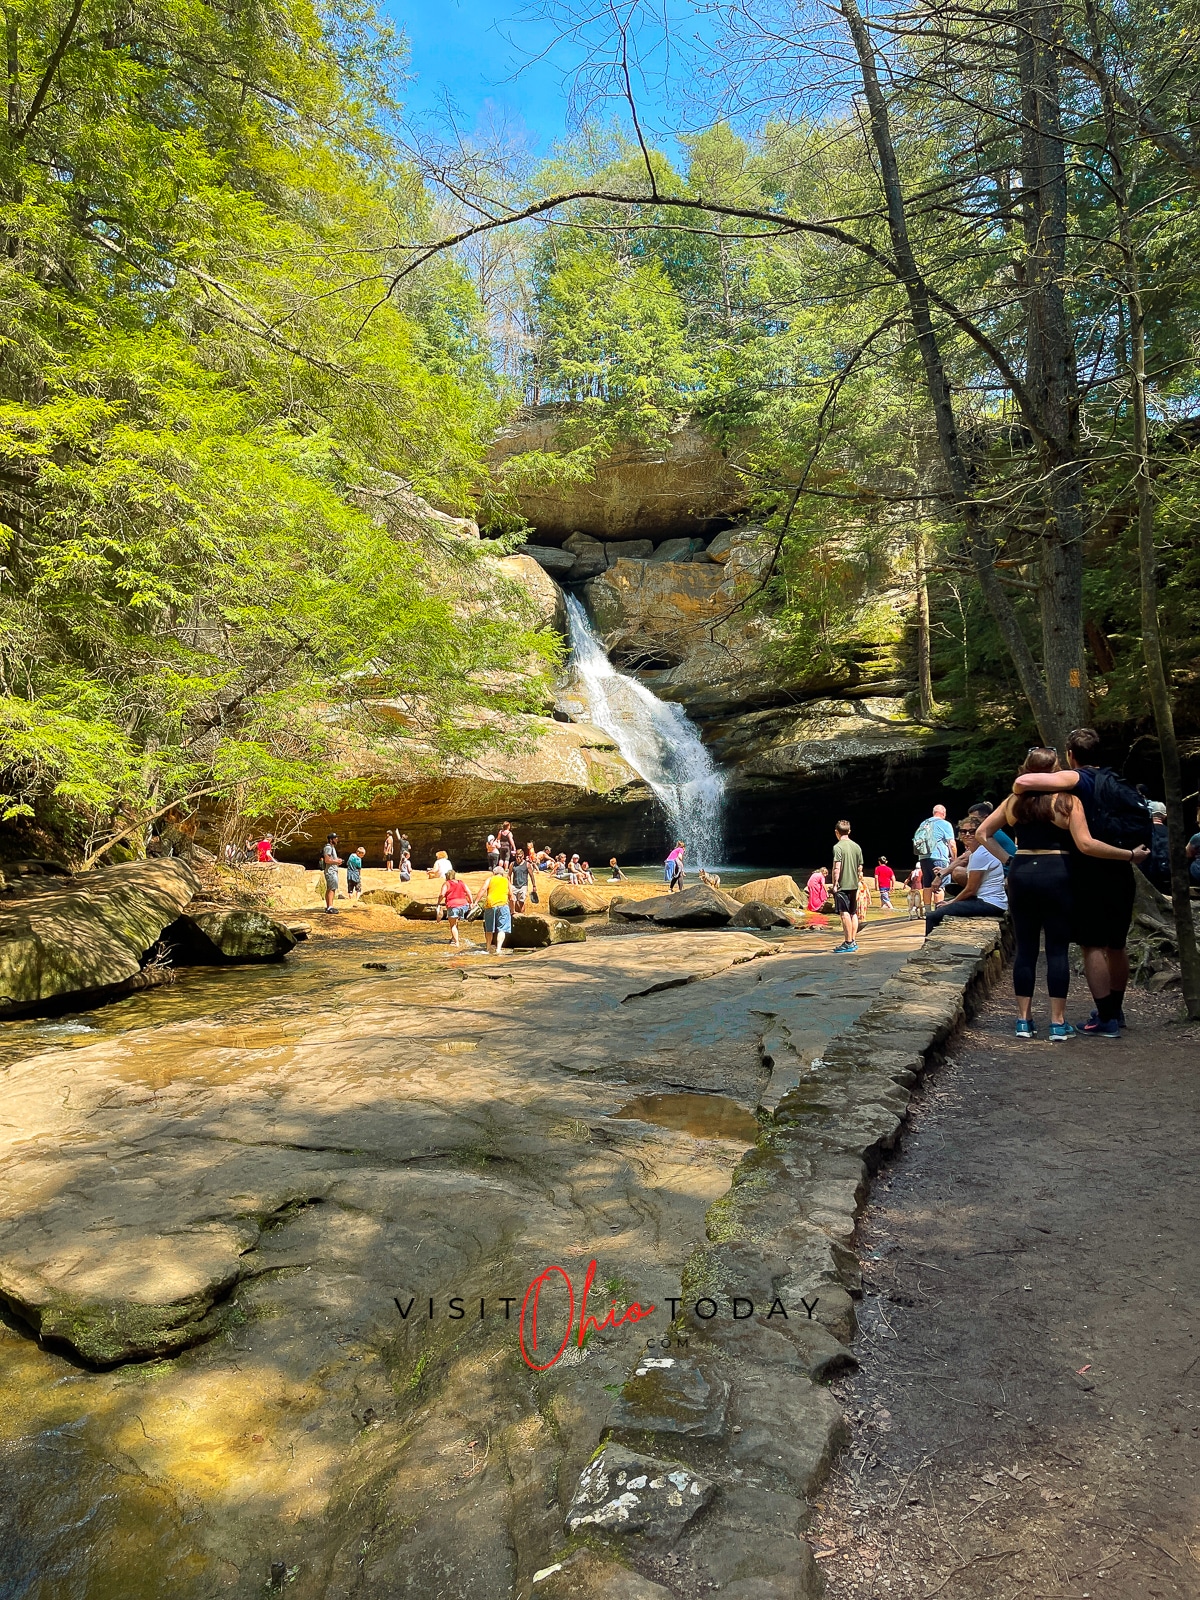 shot of cedar falls waterfall from way back. Lost of people in the view of the camera Photo credit: Cindy Gordon of VisitOhioToday.com